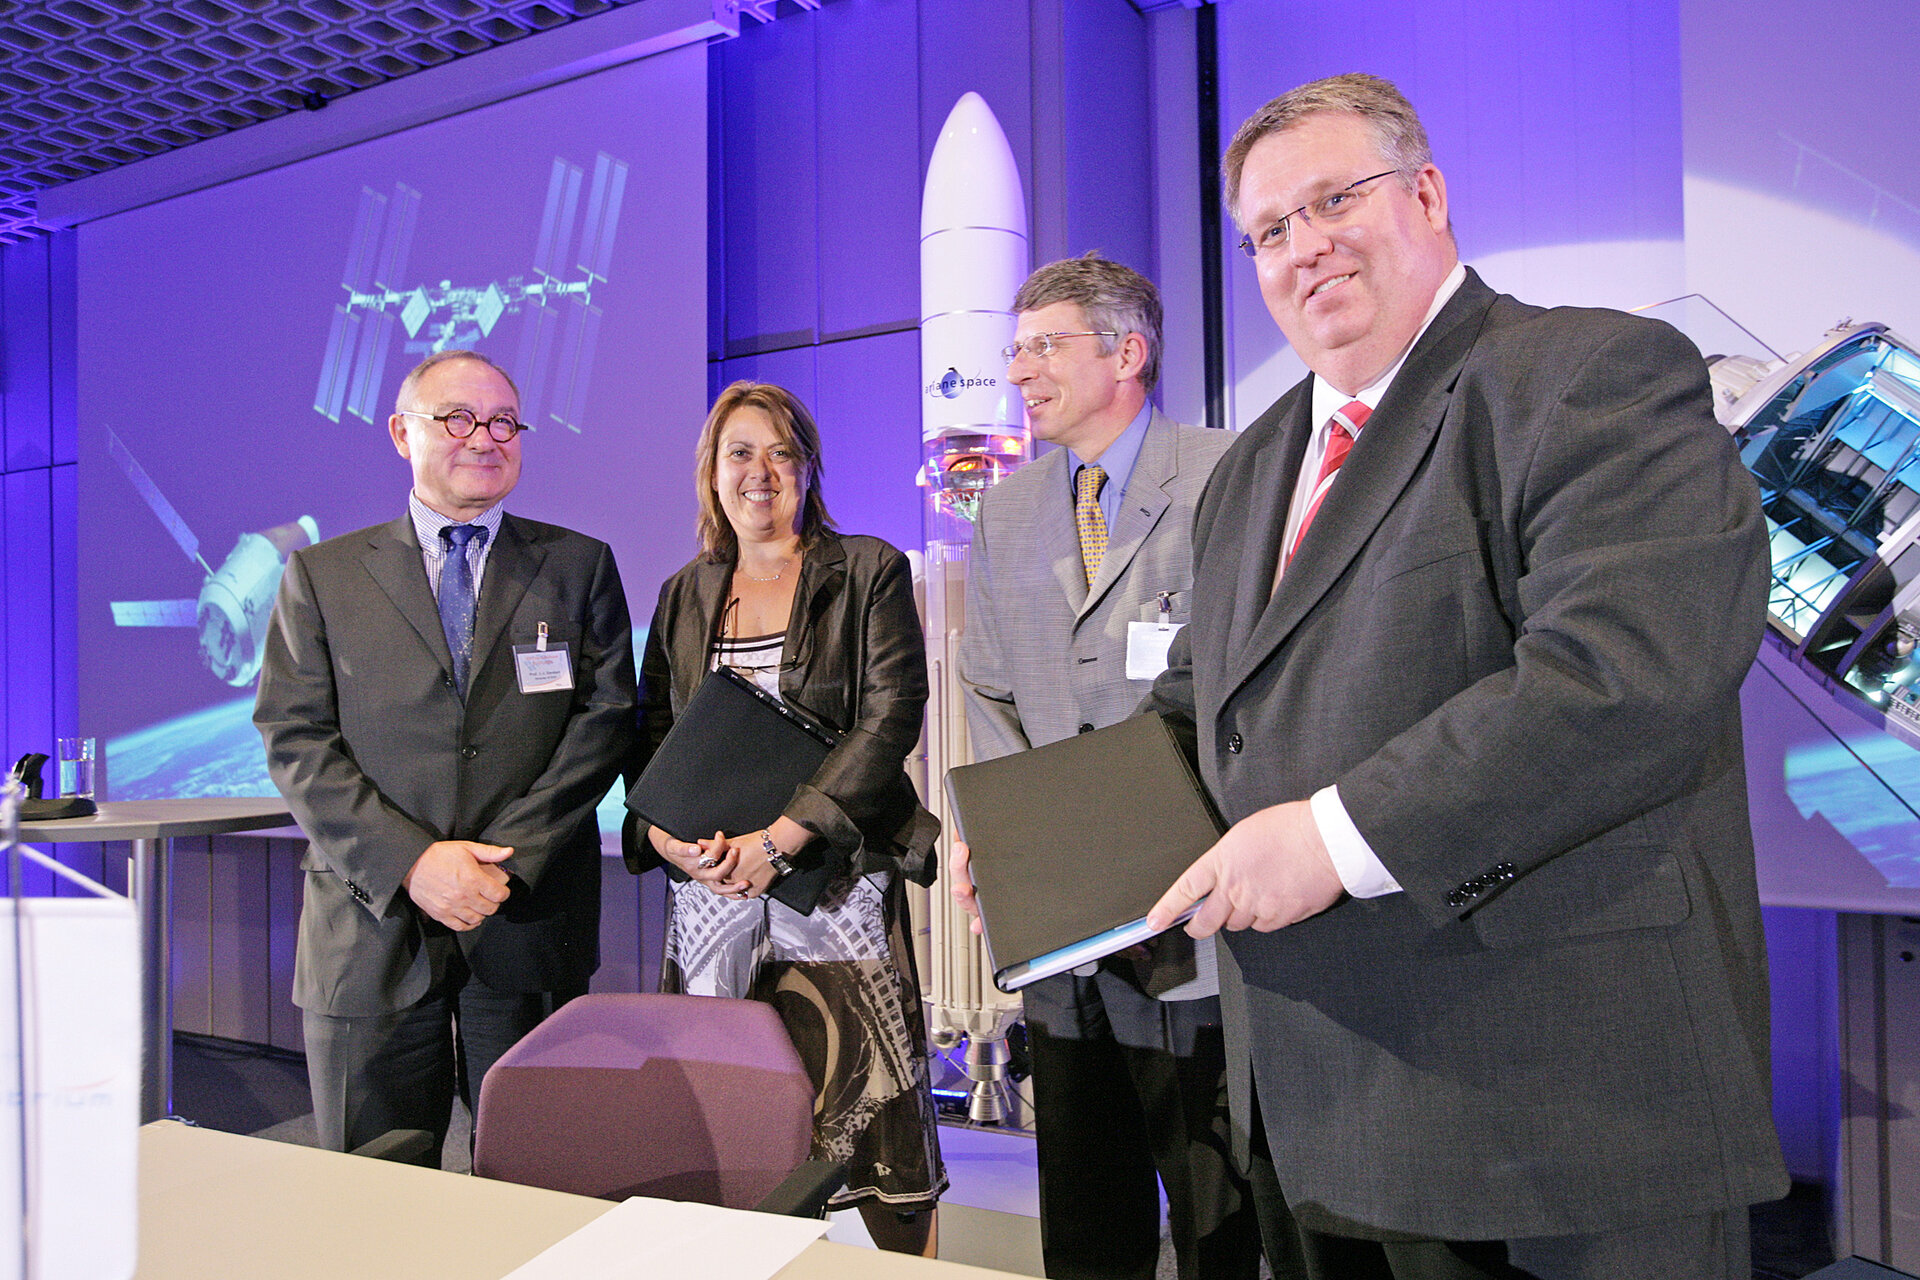 Signature of the study contract for ARV with EADS Astrium